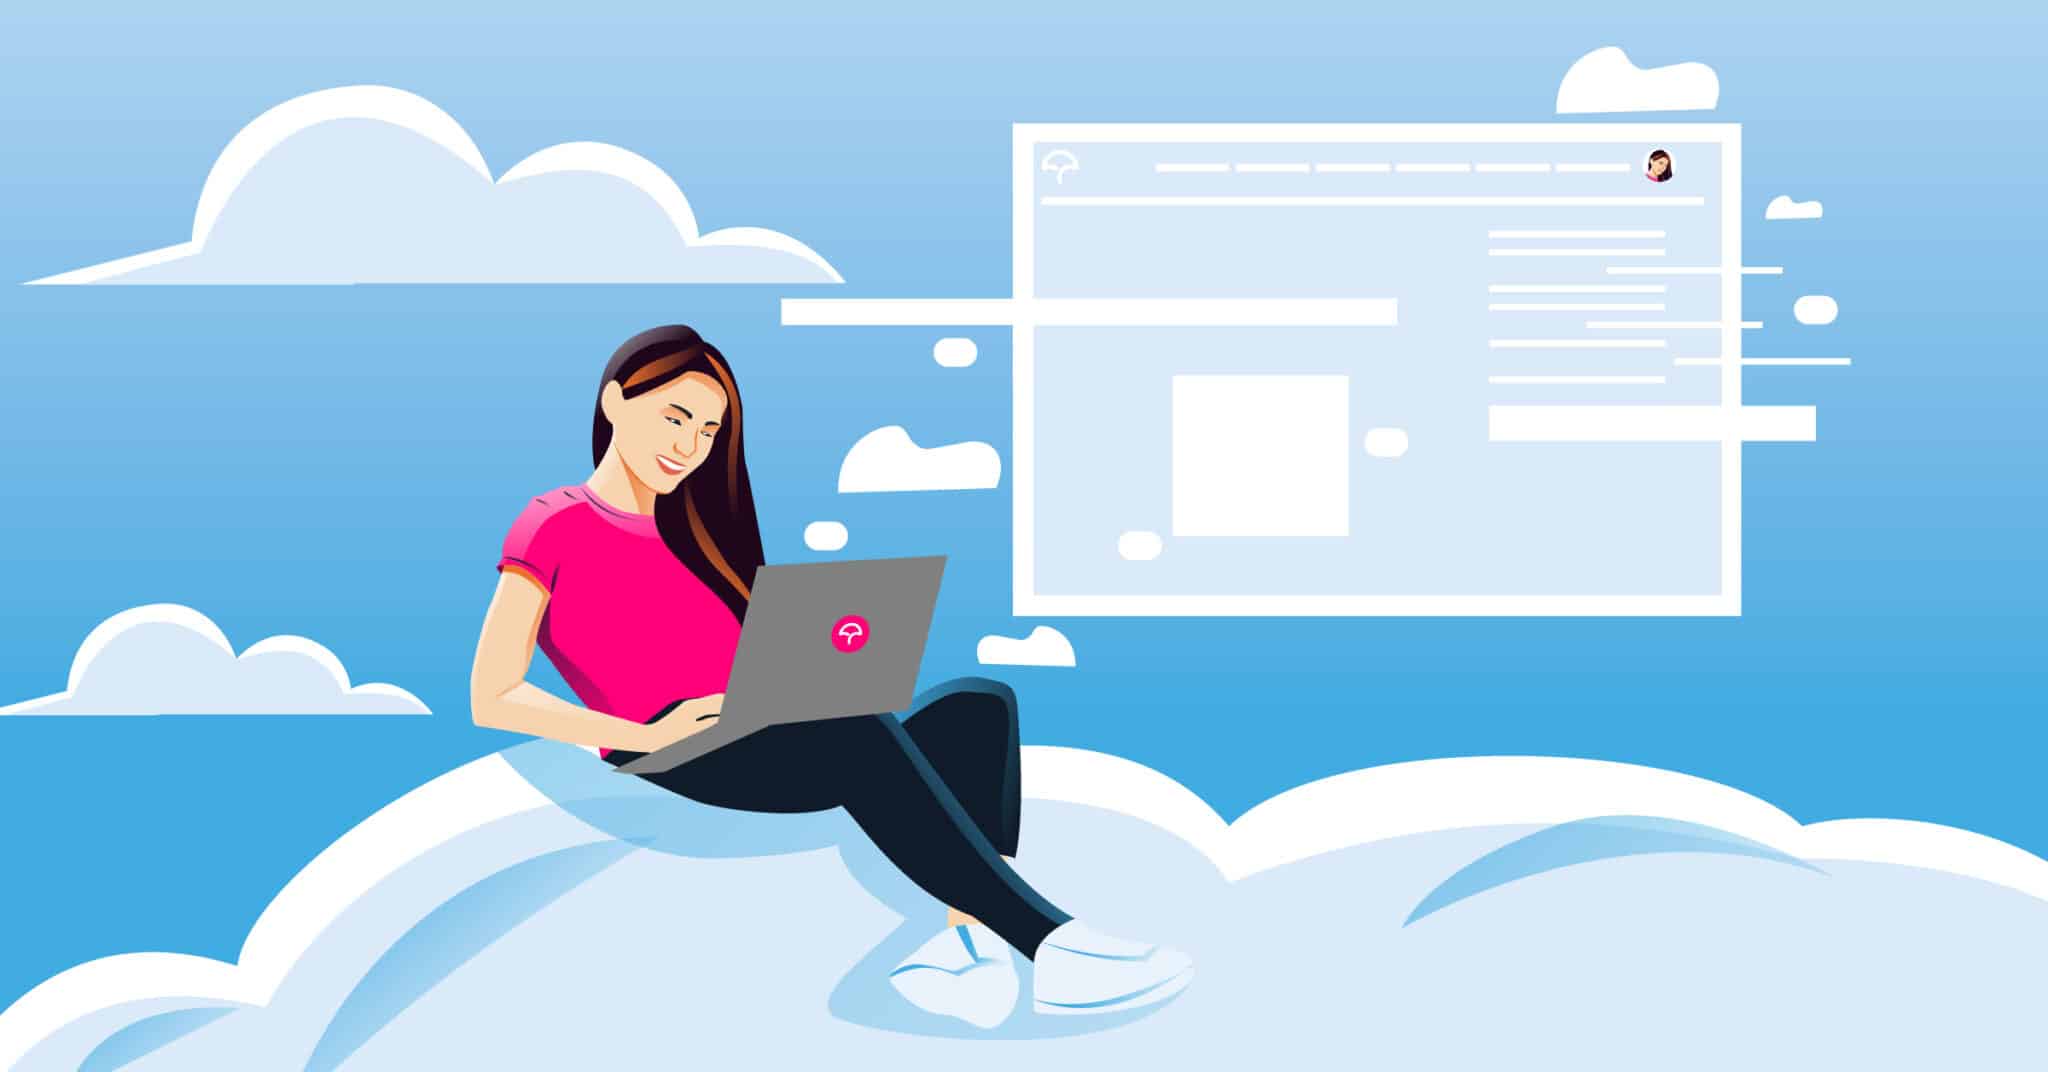 A woman with a bright pink t-shirt sits on a cloud in the sky, smiling as she is working on her laptop. A dashboard with cloud-like traits forms to the right of her.